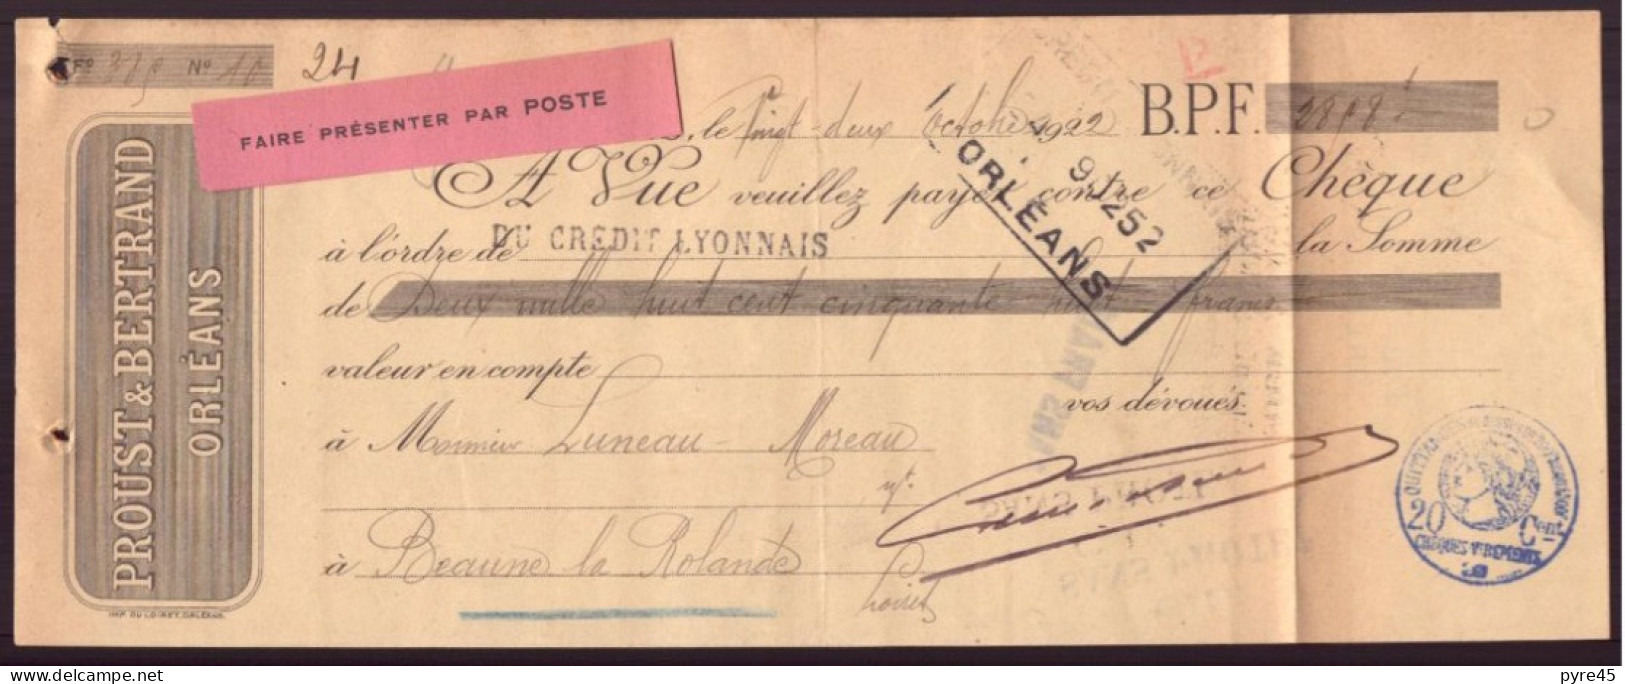 CHEQUE DU 22 / 10 / 1922 PROUST BERTRAND A ORLEANS - Cheques & Traveler's Cheques